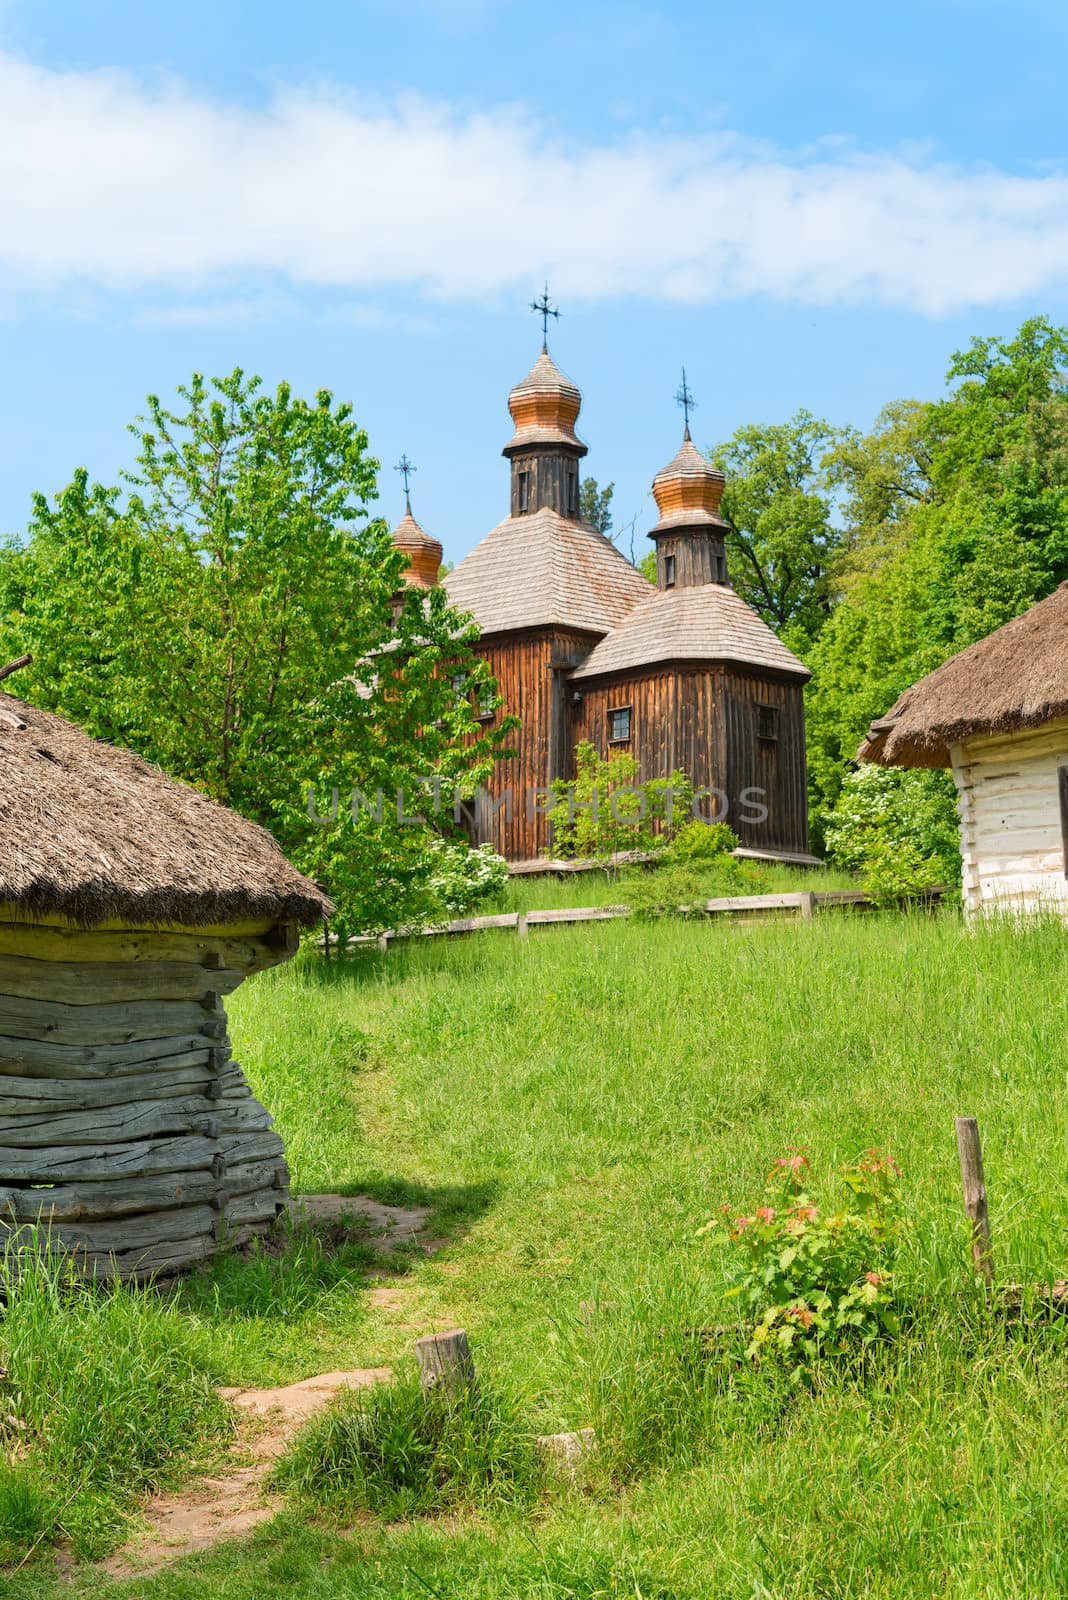 Vintage wooden church on green country under blue sky